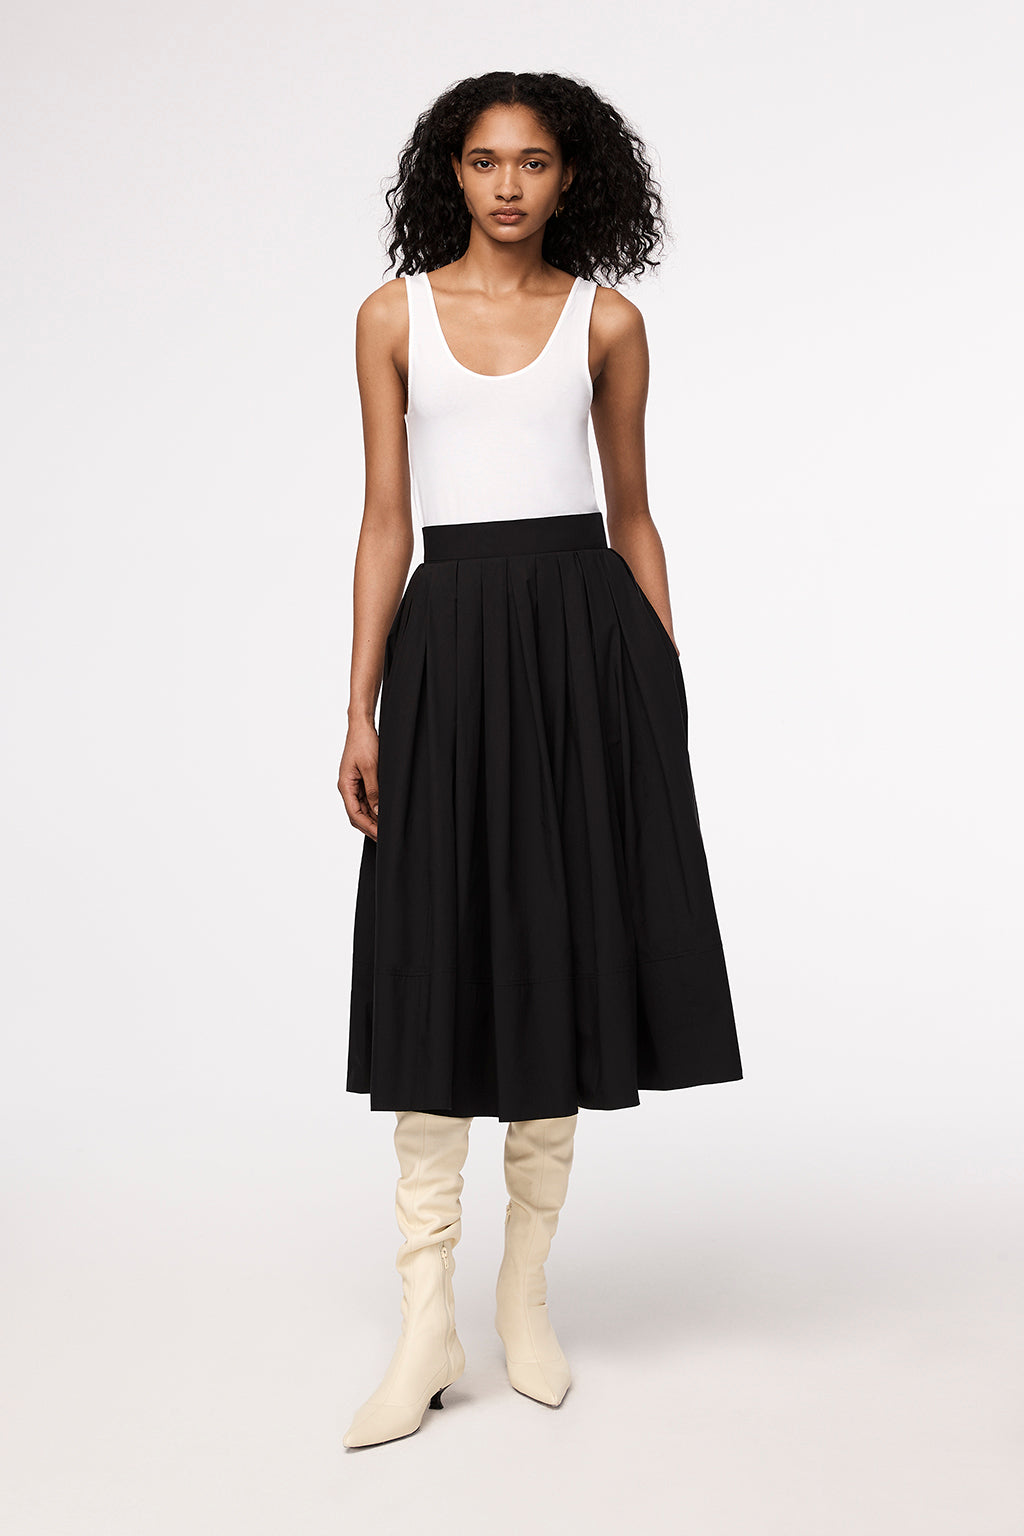 ANOTHER TOMORROW GATHERED CIRCLE SKIRT,A222SK003-CO-BLK48